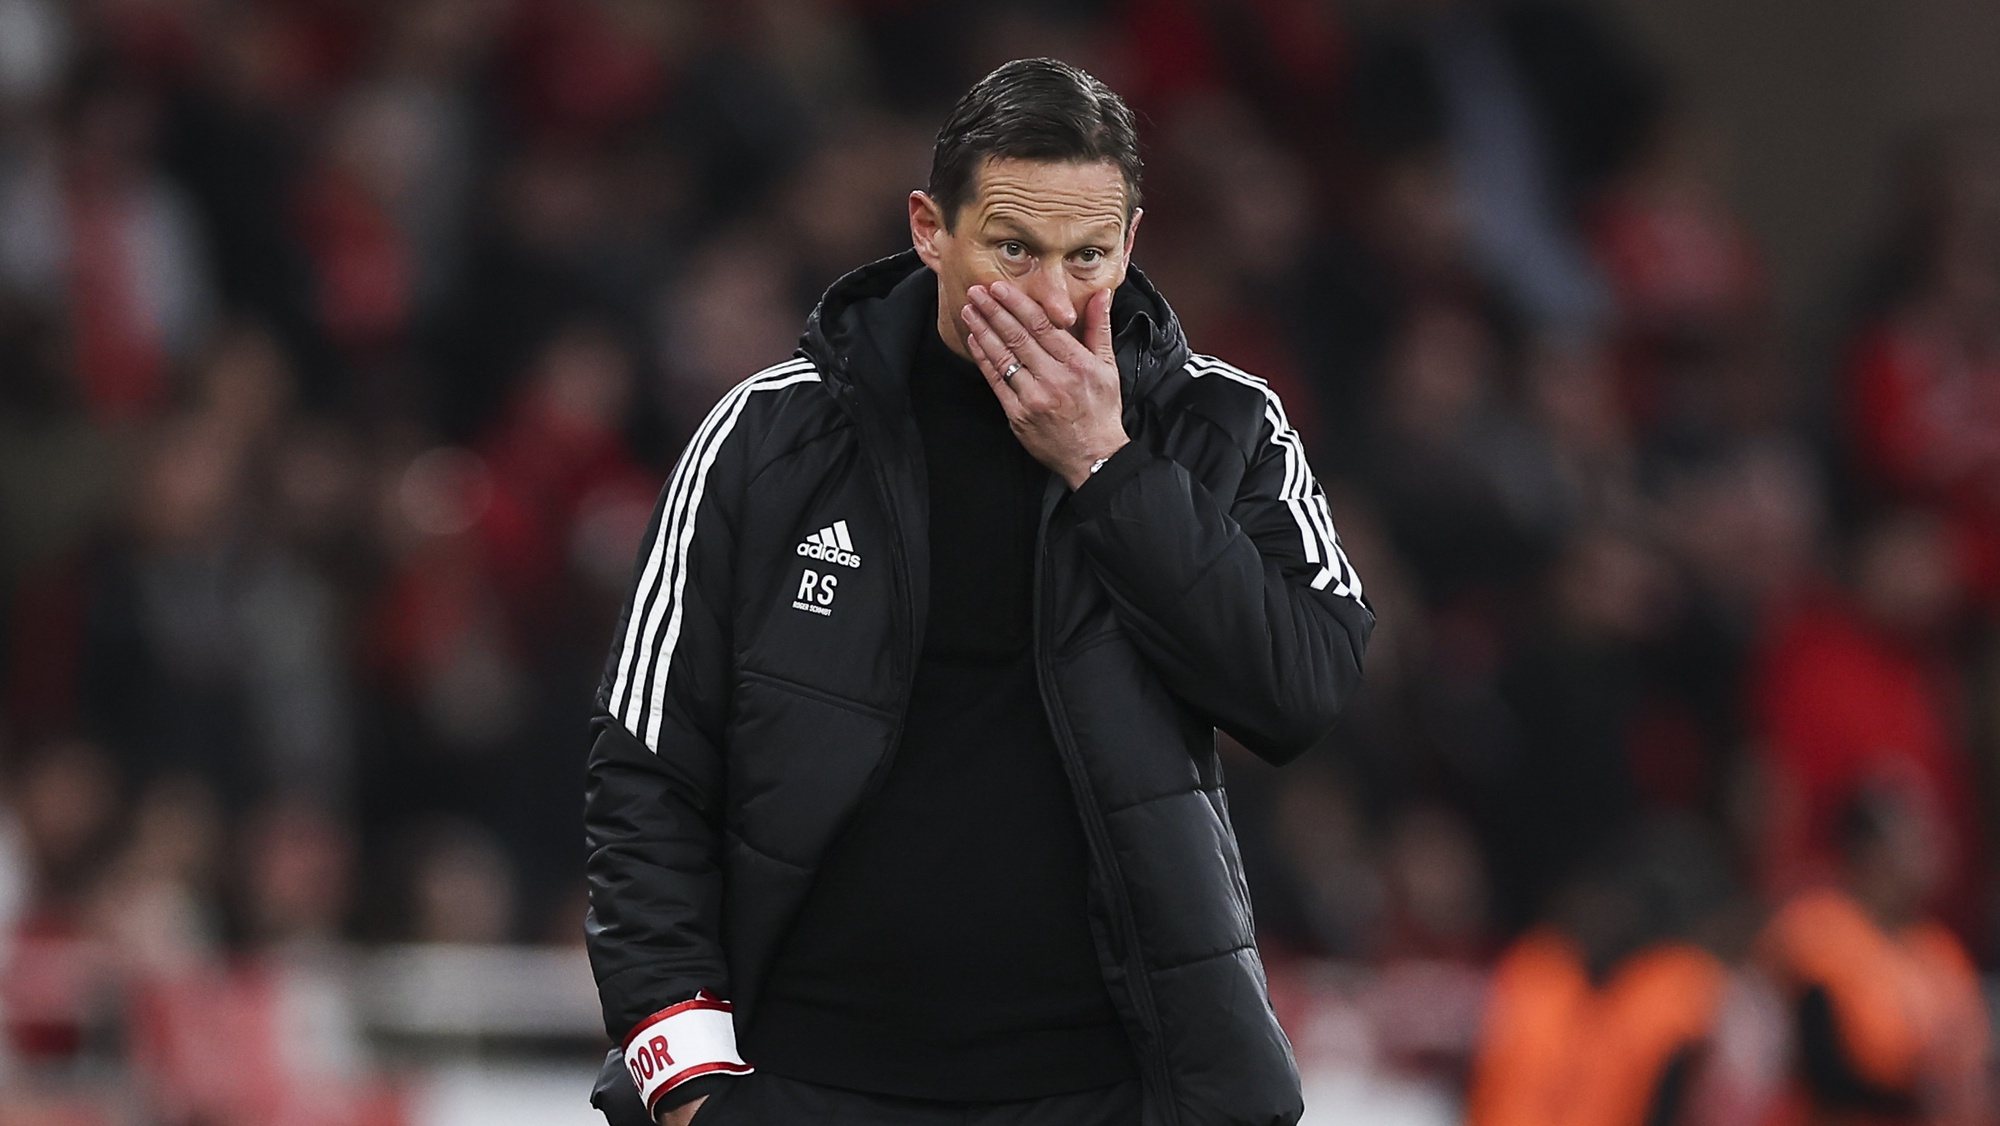 SL Benfica&#039;s head coach Roger Schmidt reacts during the Portuguese First League soccer match, between SL Benfica and Sporting CP, at Luz stadium in Lisbon, Portugal, 15 January 2023. JOSE SENA GOULAO/LUSA